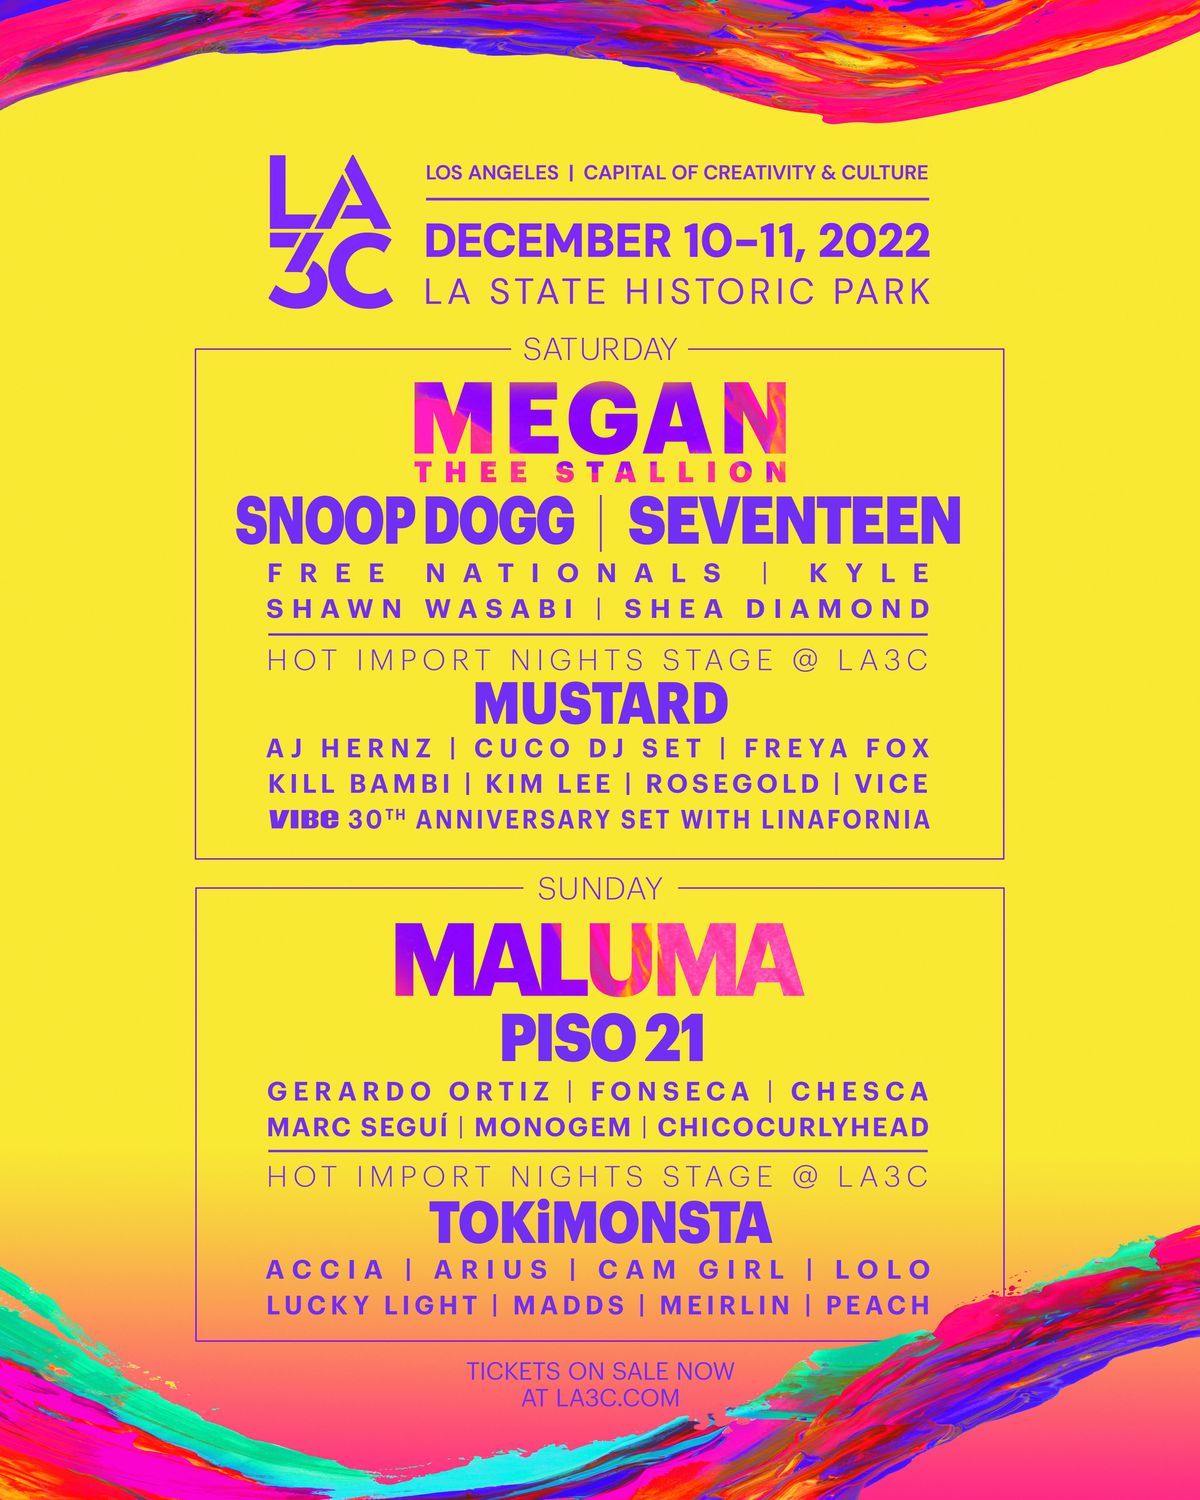 A poster with the music lineup for LA3C festival includes names like Megan Thee Stallion, Snoop Dogg, Tokimonsta, and Maluma.